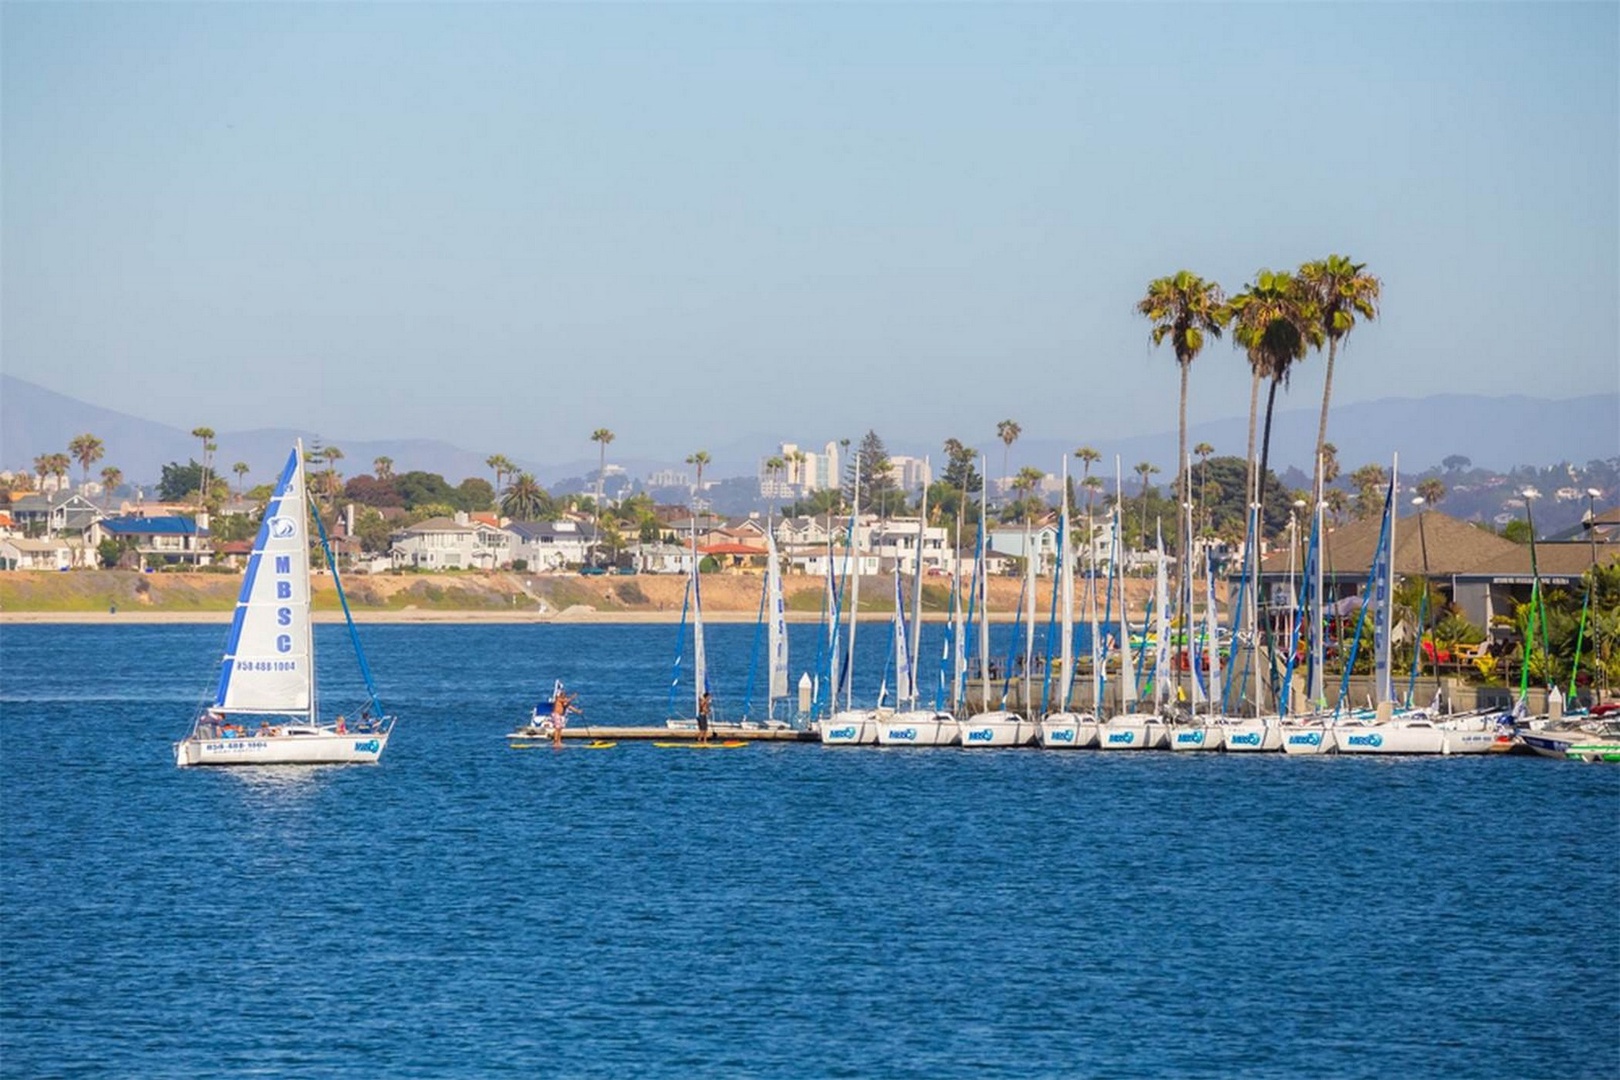 Mission Bay boat rentals available